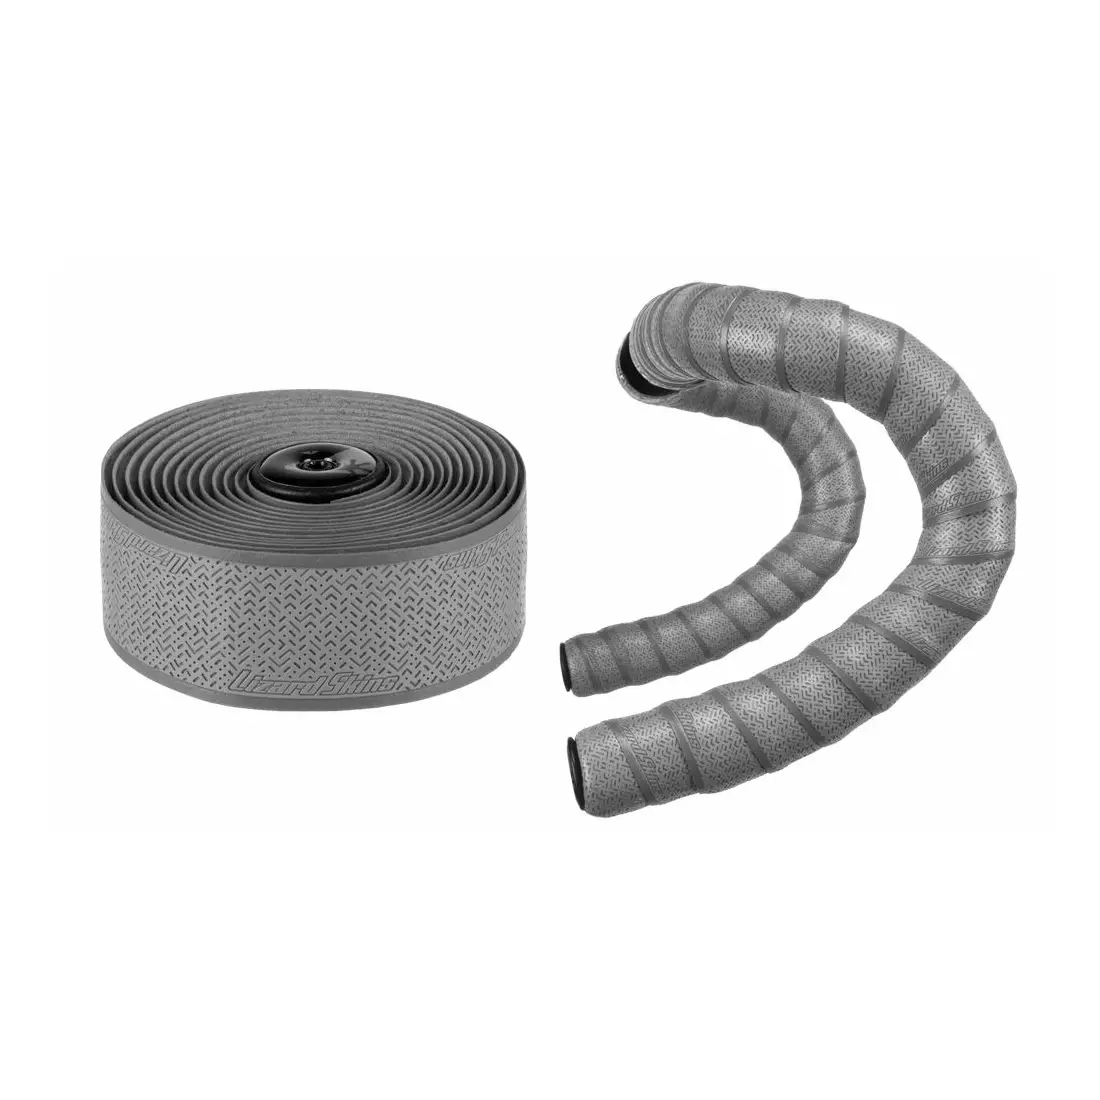 LIZARDSKINS bicycle handlebar wrap dsp 1.8 race bar tape 1,8mm cool gray LZS-DSPCY132